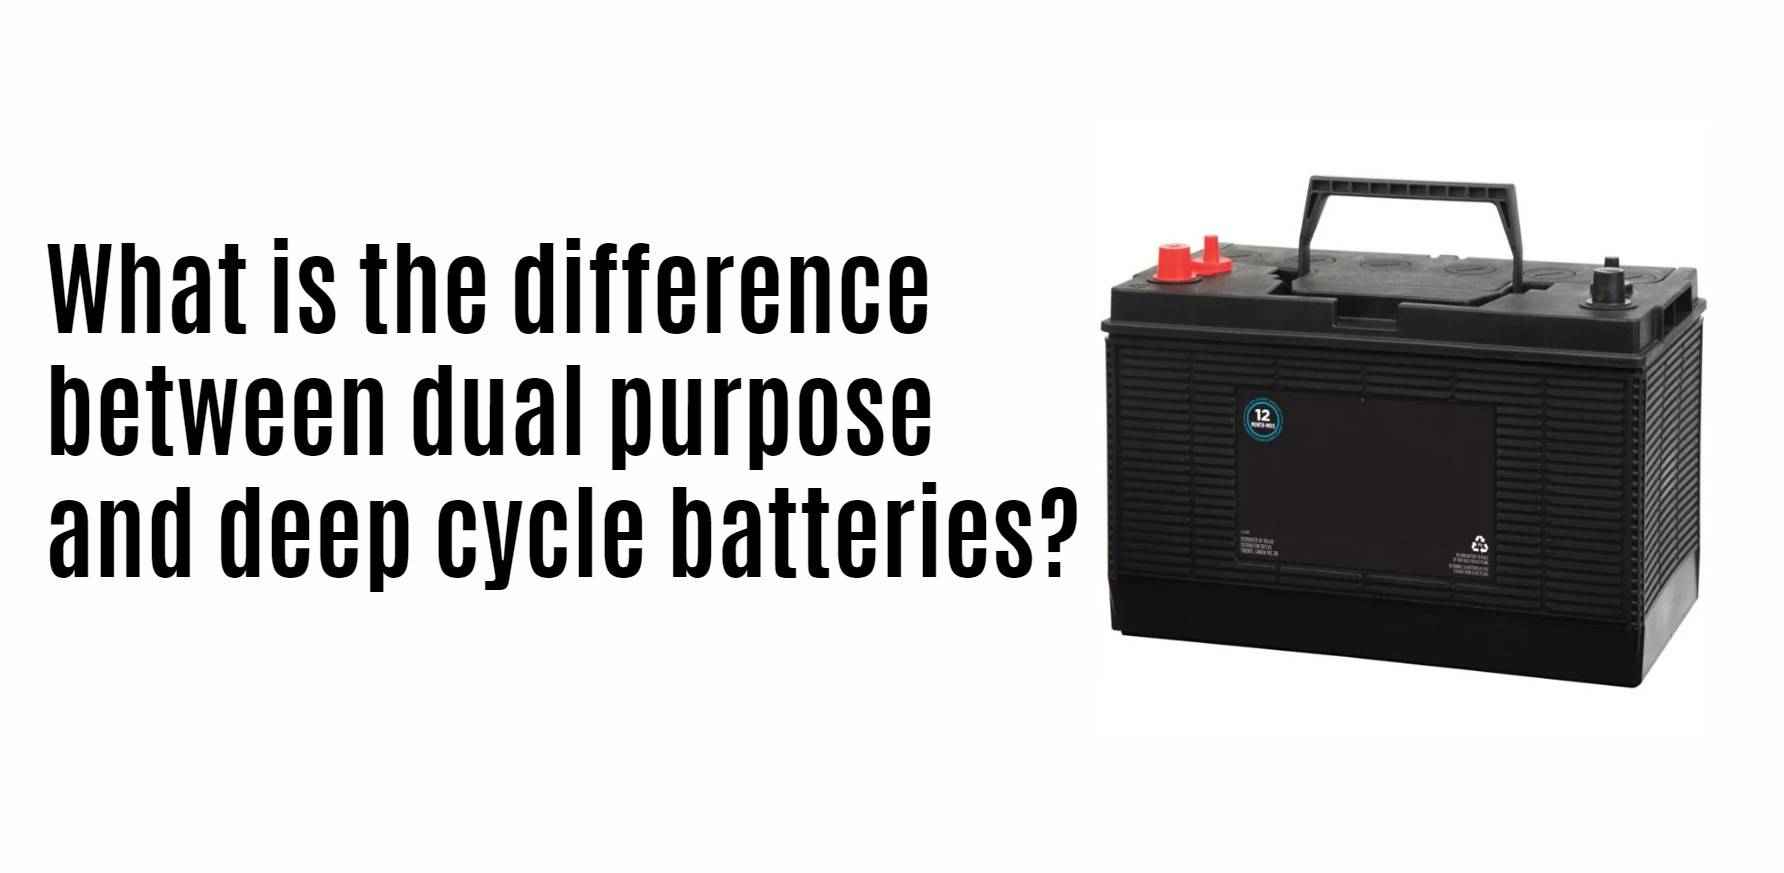 What is the difference between dual purpose and deep cycle batteries?